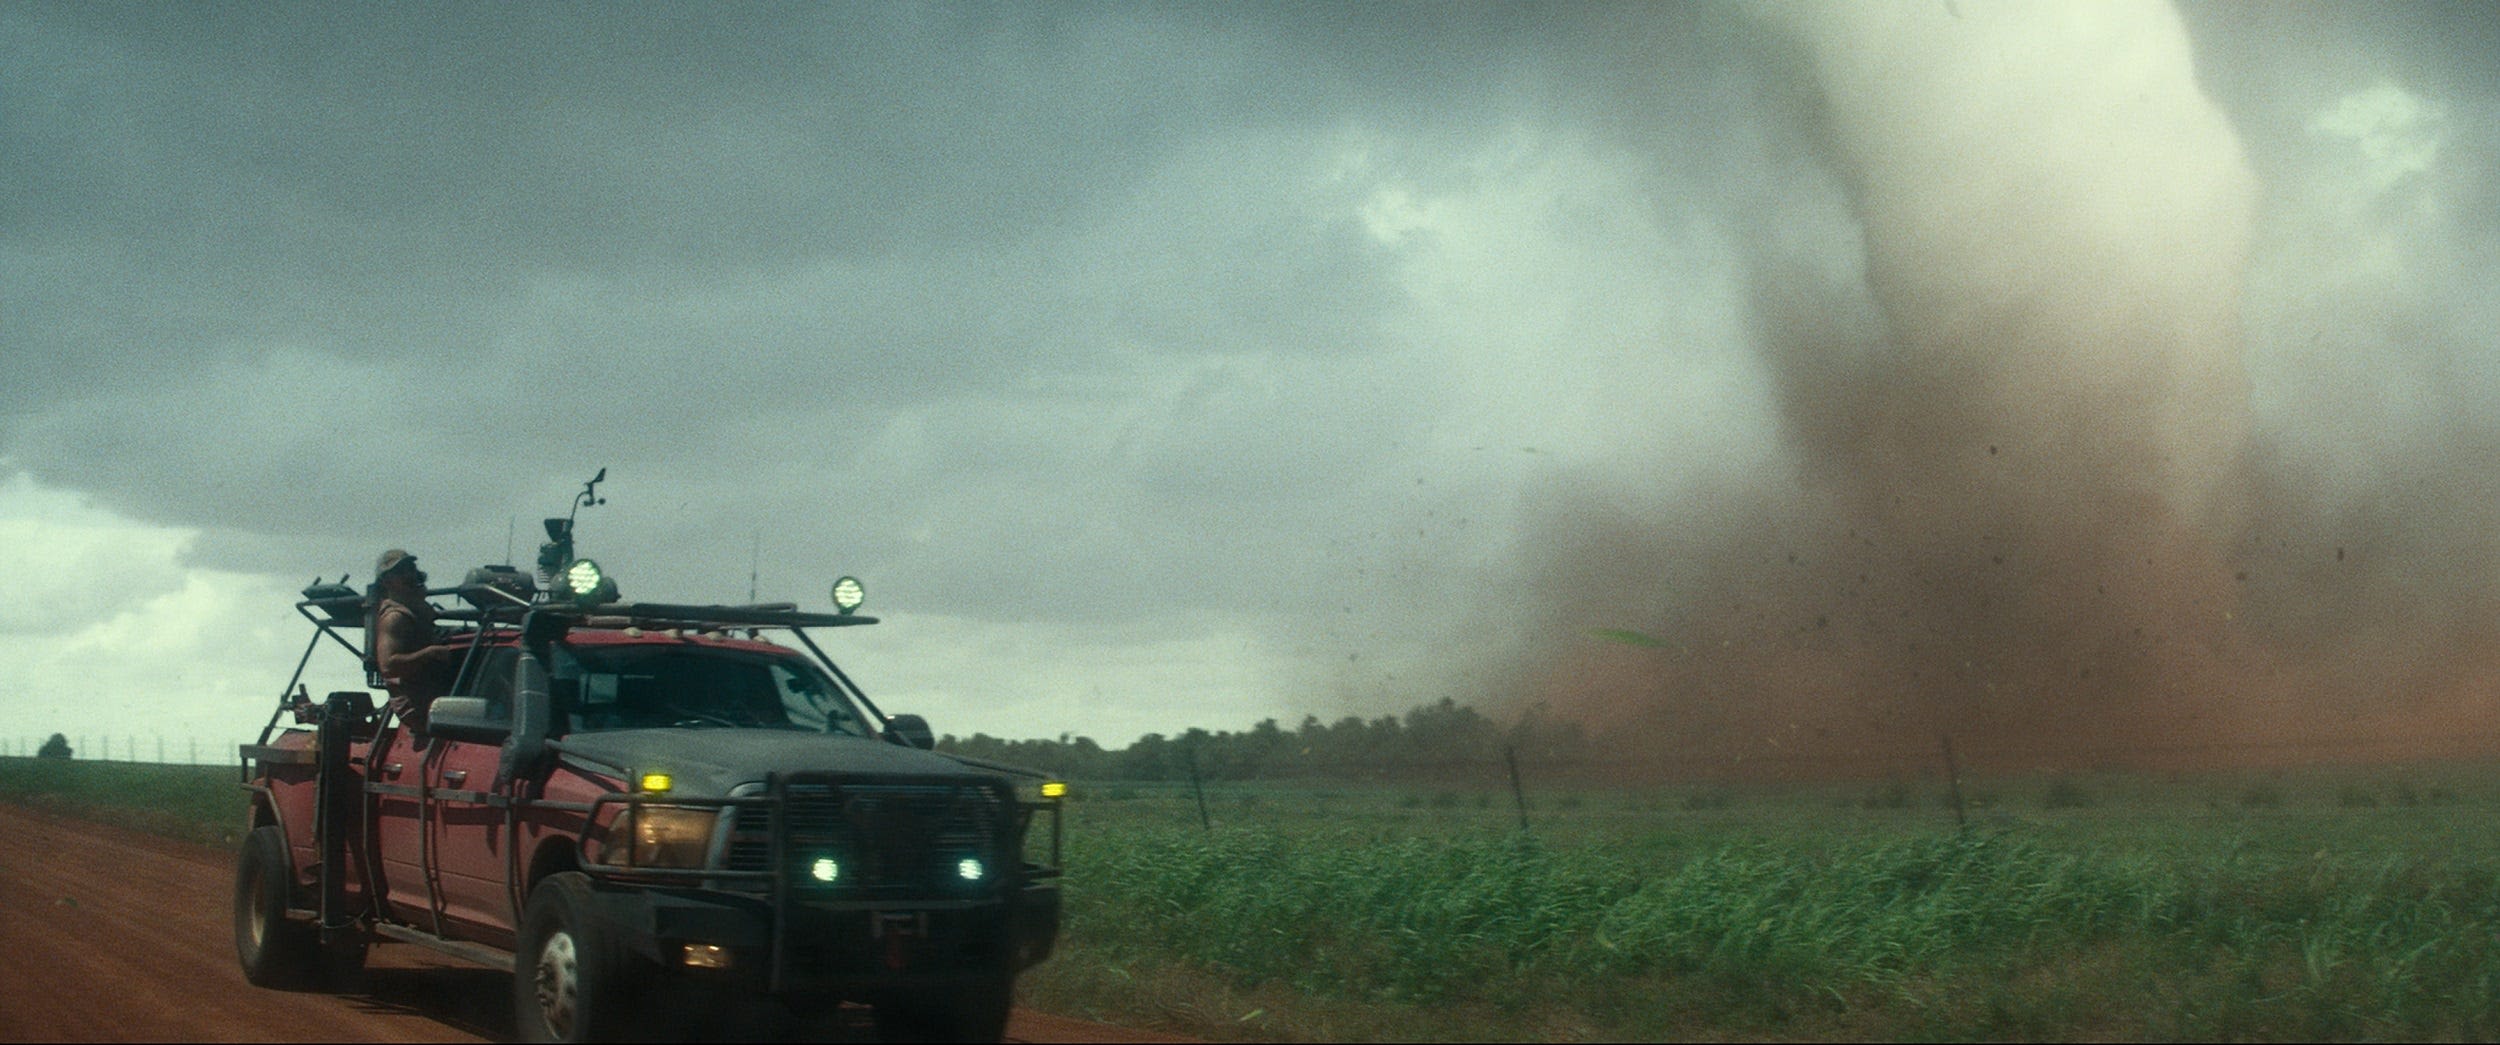 'Twisters' tornado consultant and director talk about film's stormy real-life inspirations